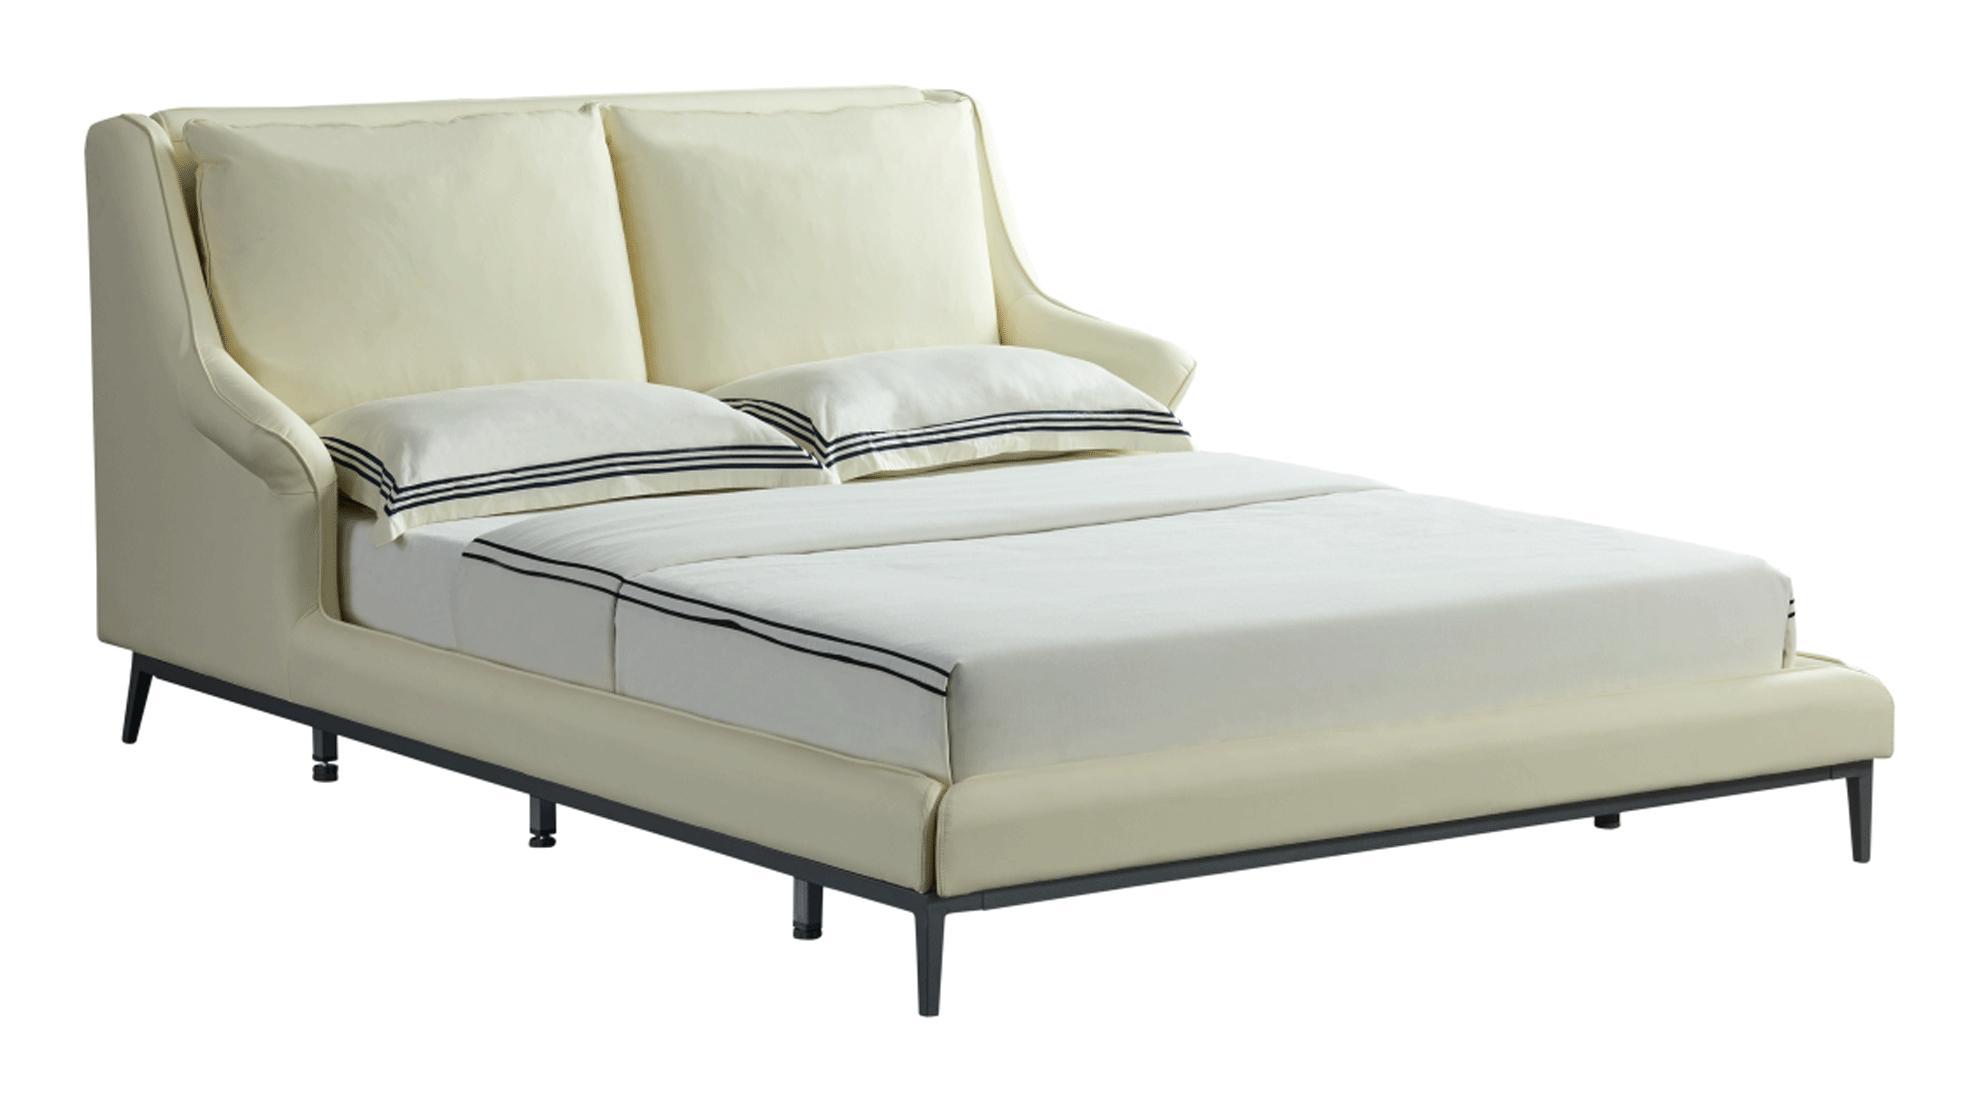 

    
6089KSBED Mat White Top-grain Leather King Bed MADE IN ITALY Contemporary ESF 6089
